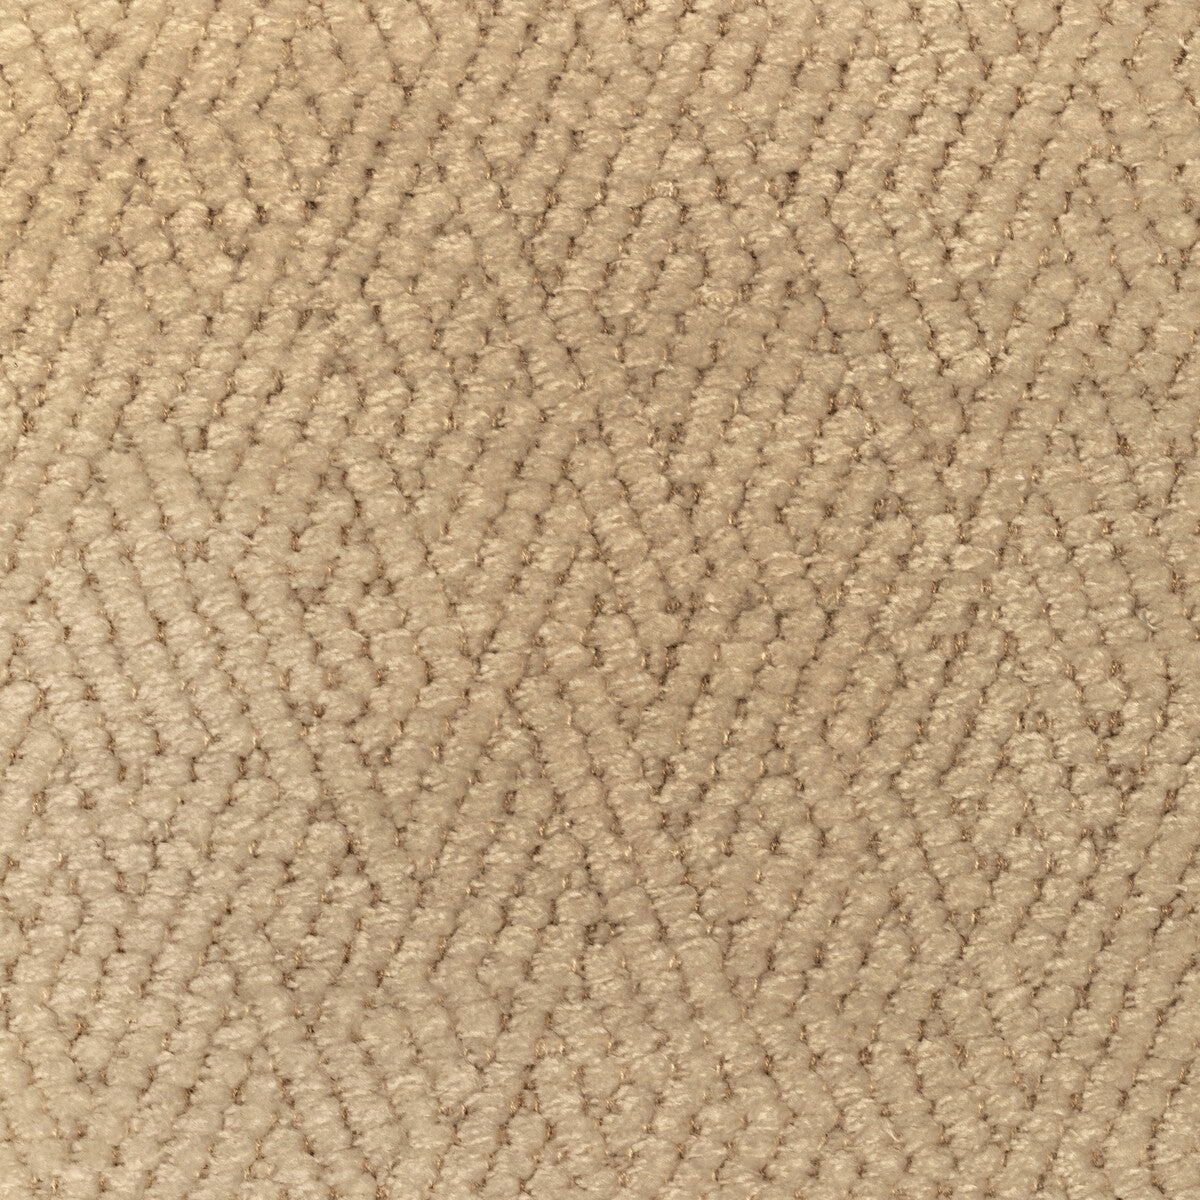 Alonso Weave fabric in wheat color - pattern 2021103.116.0 - by Lee Jofa in the Triana Weaves collection